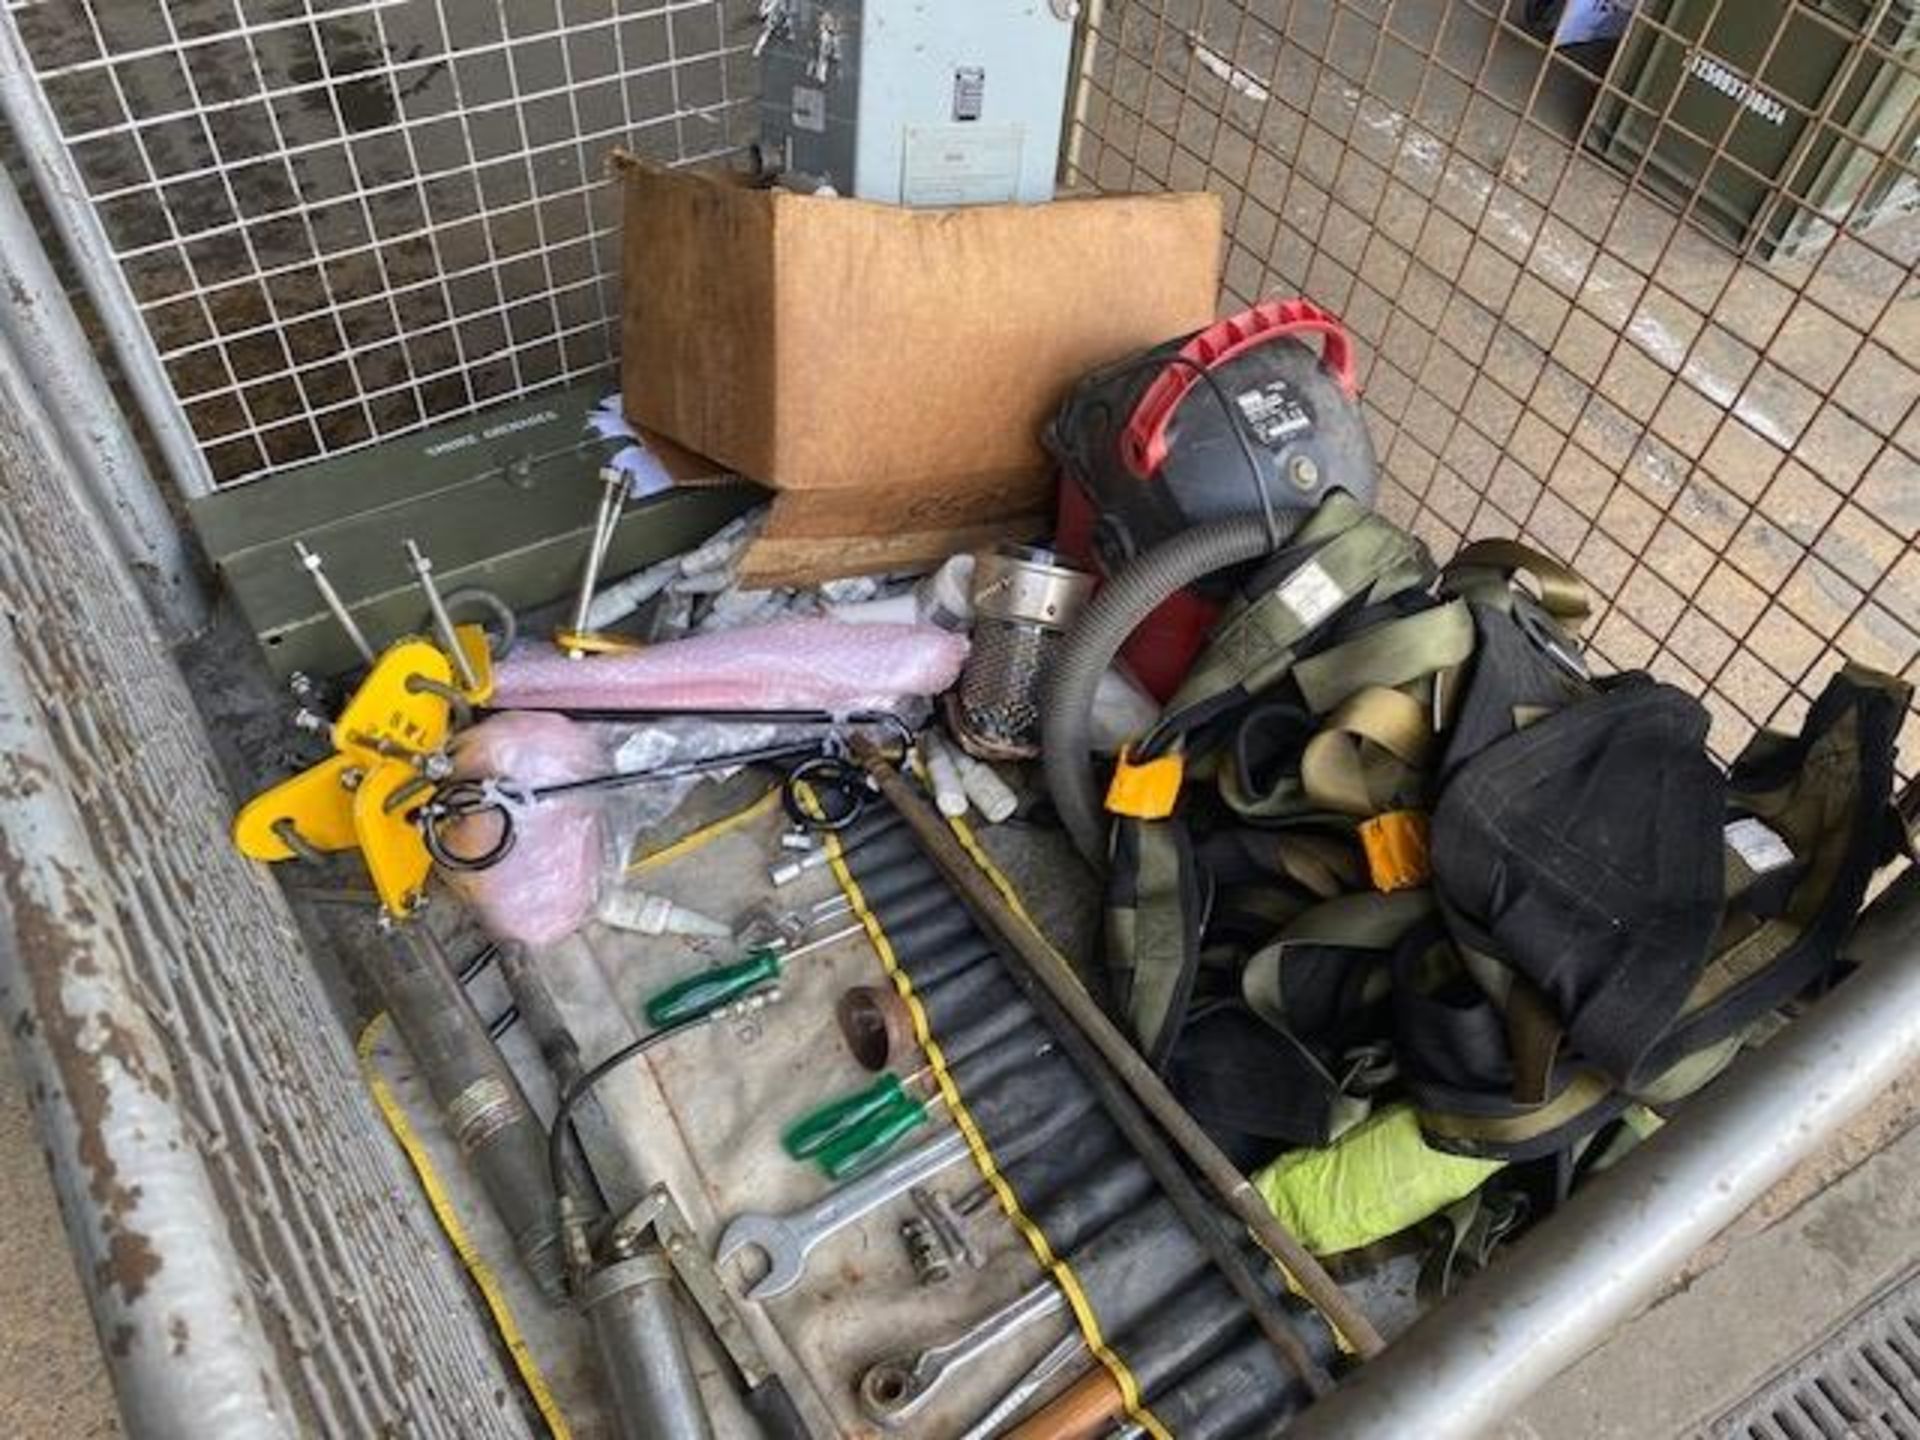 1 x Stillage of Tools, Cooking Vessel Straps etc - Image 2 of 3